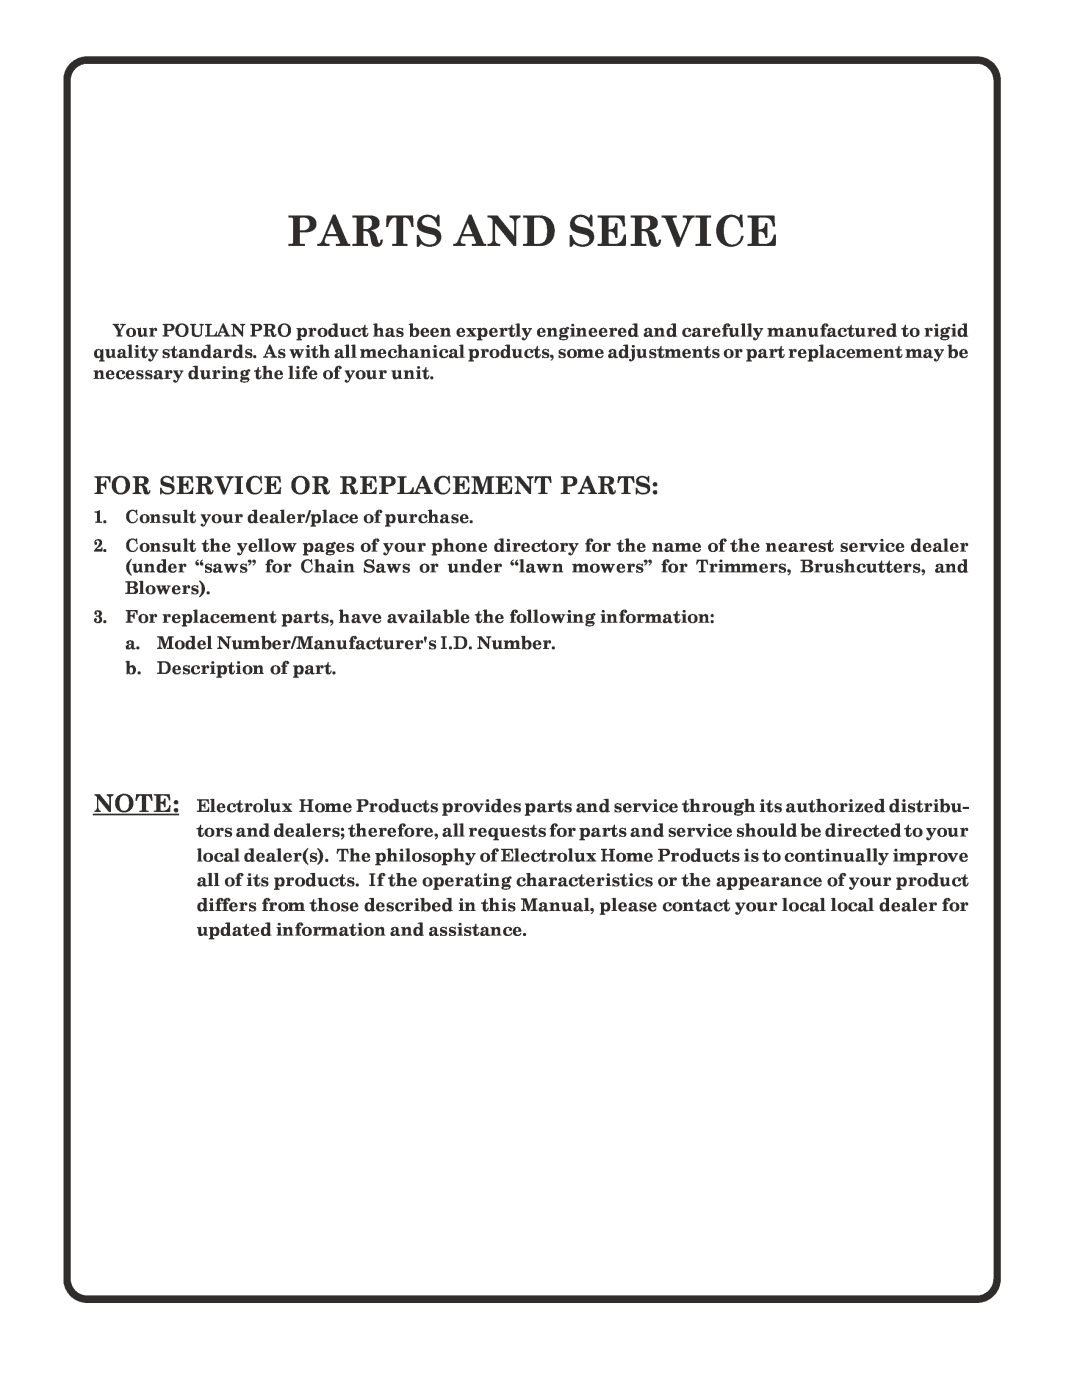 Poulan PR25PH48STC owner manual Parts And Service, For Service Or Replacement Parts 